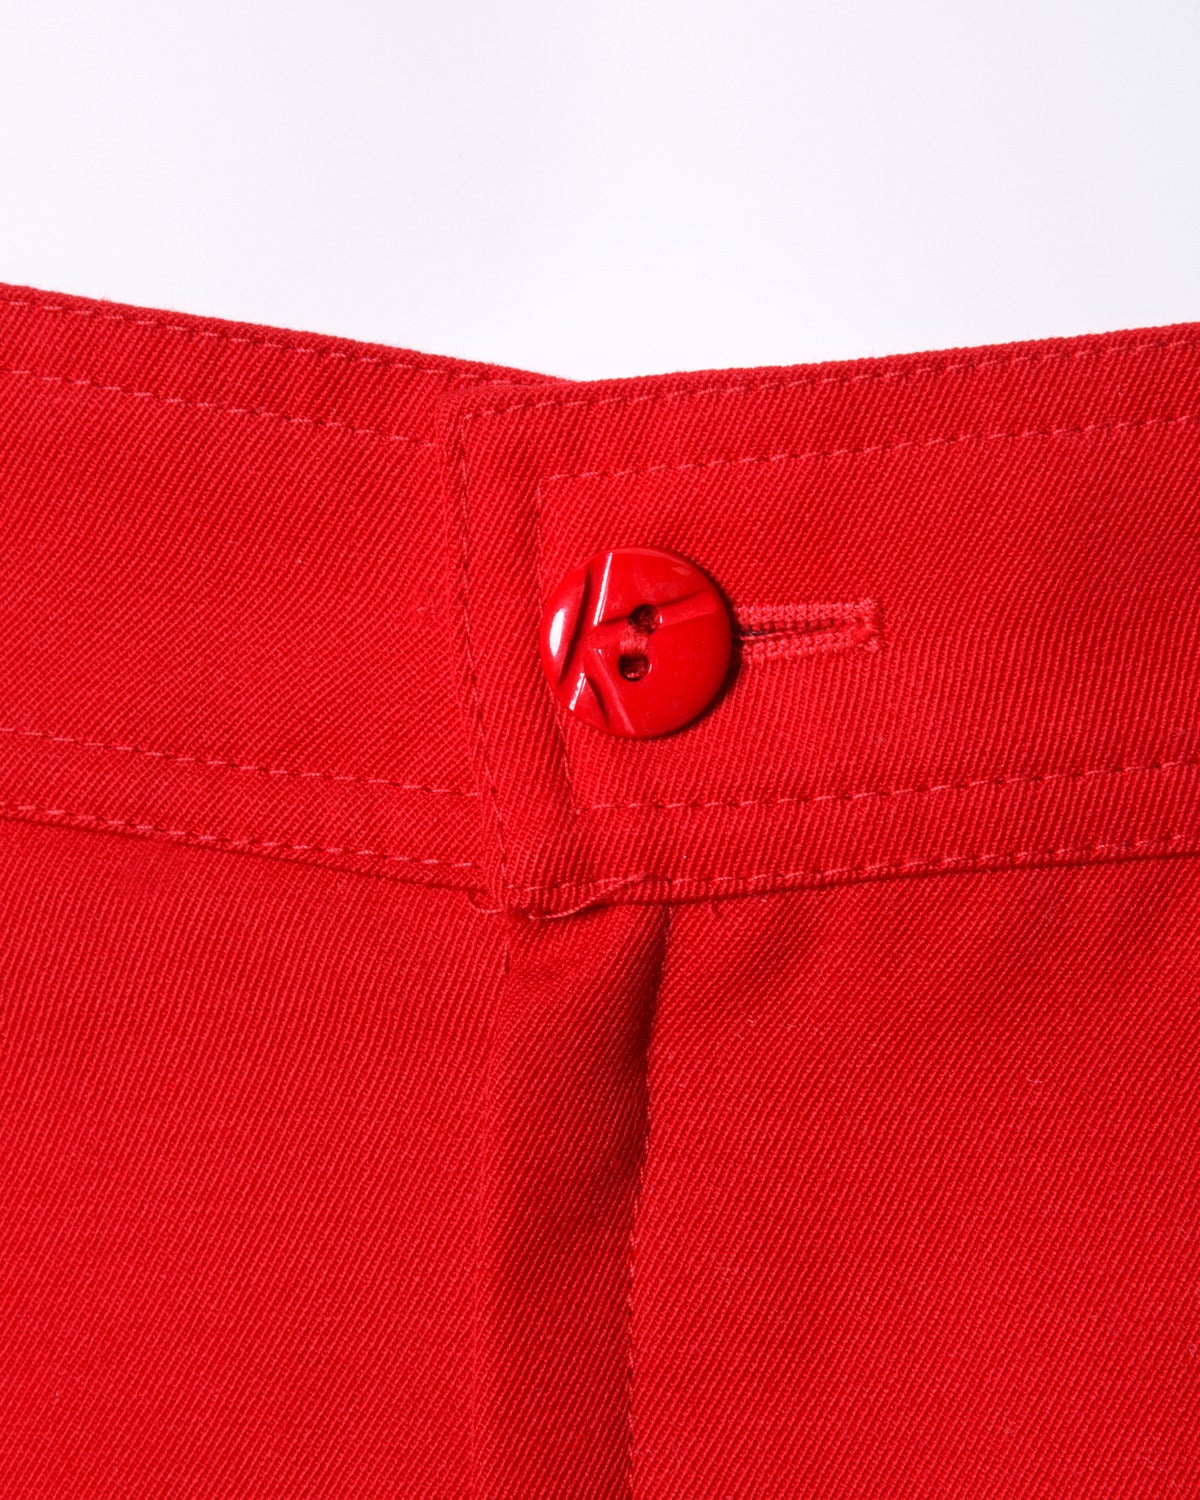 Krizia Vintage 1990s 90s Red Wool Pencil Skirt 1